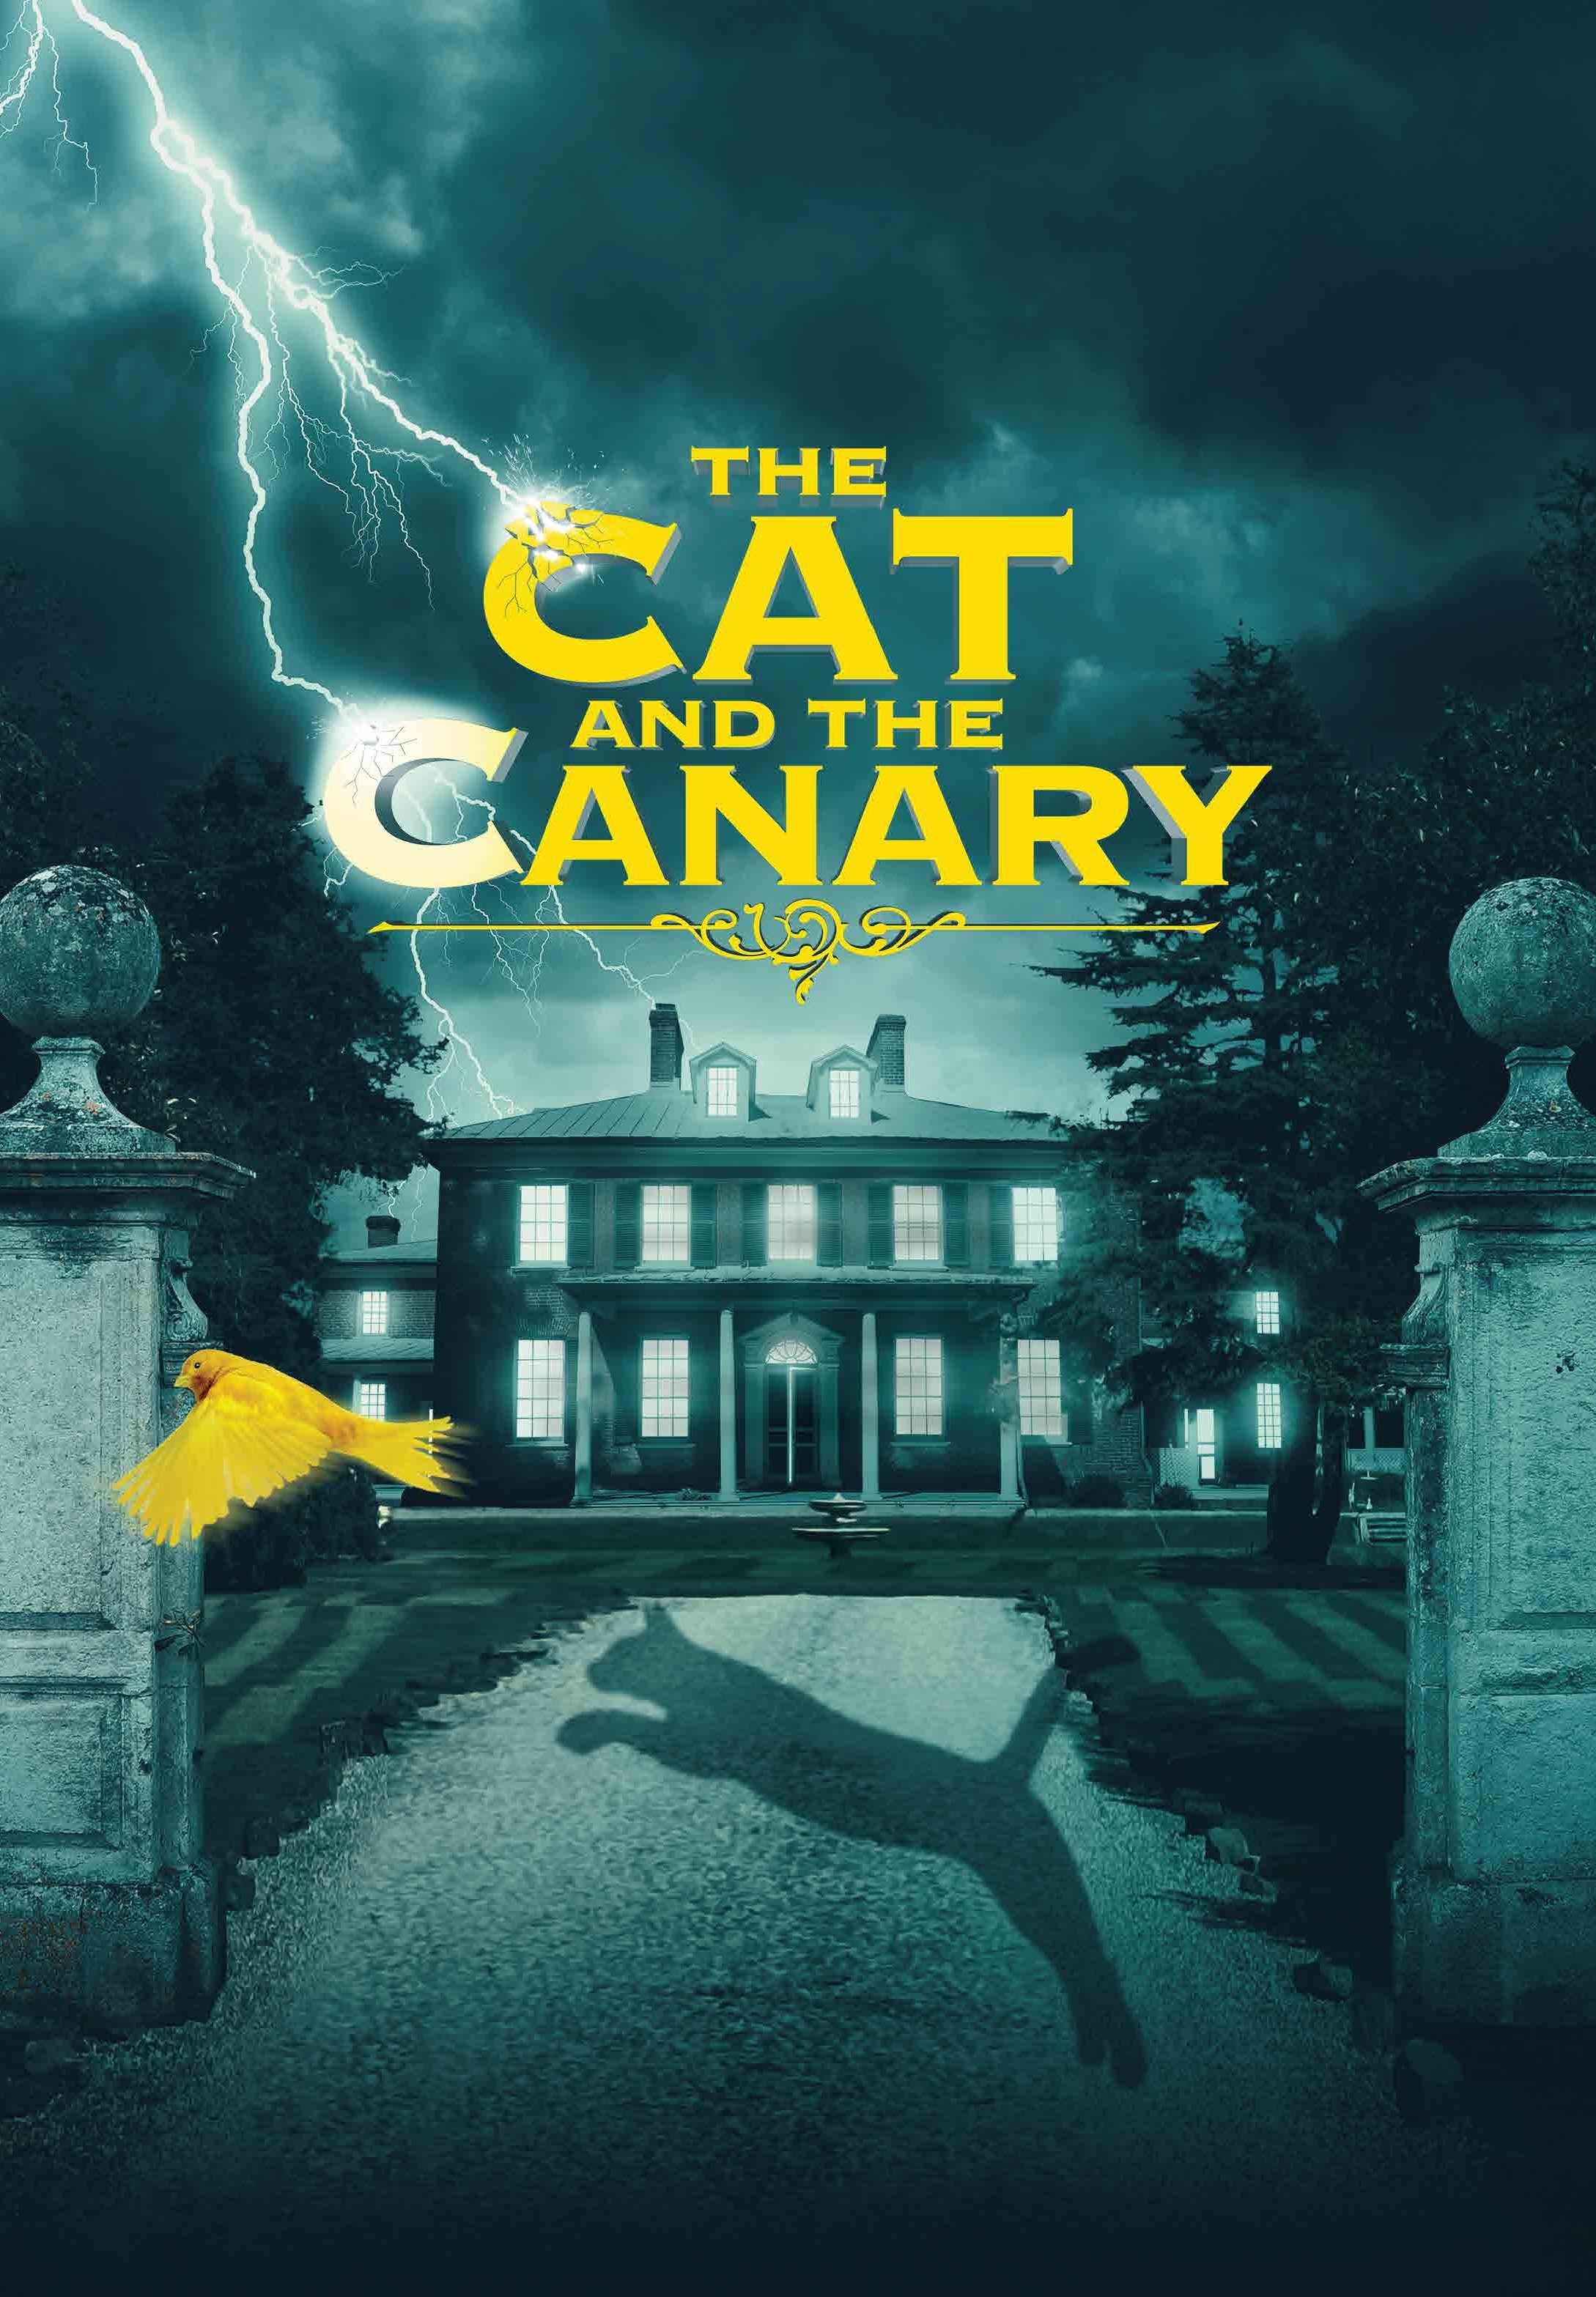 THE CAT AND THE CANARY TOUR 2020 THEATRE FLYERS X 4